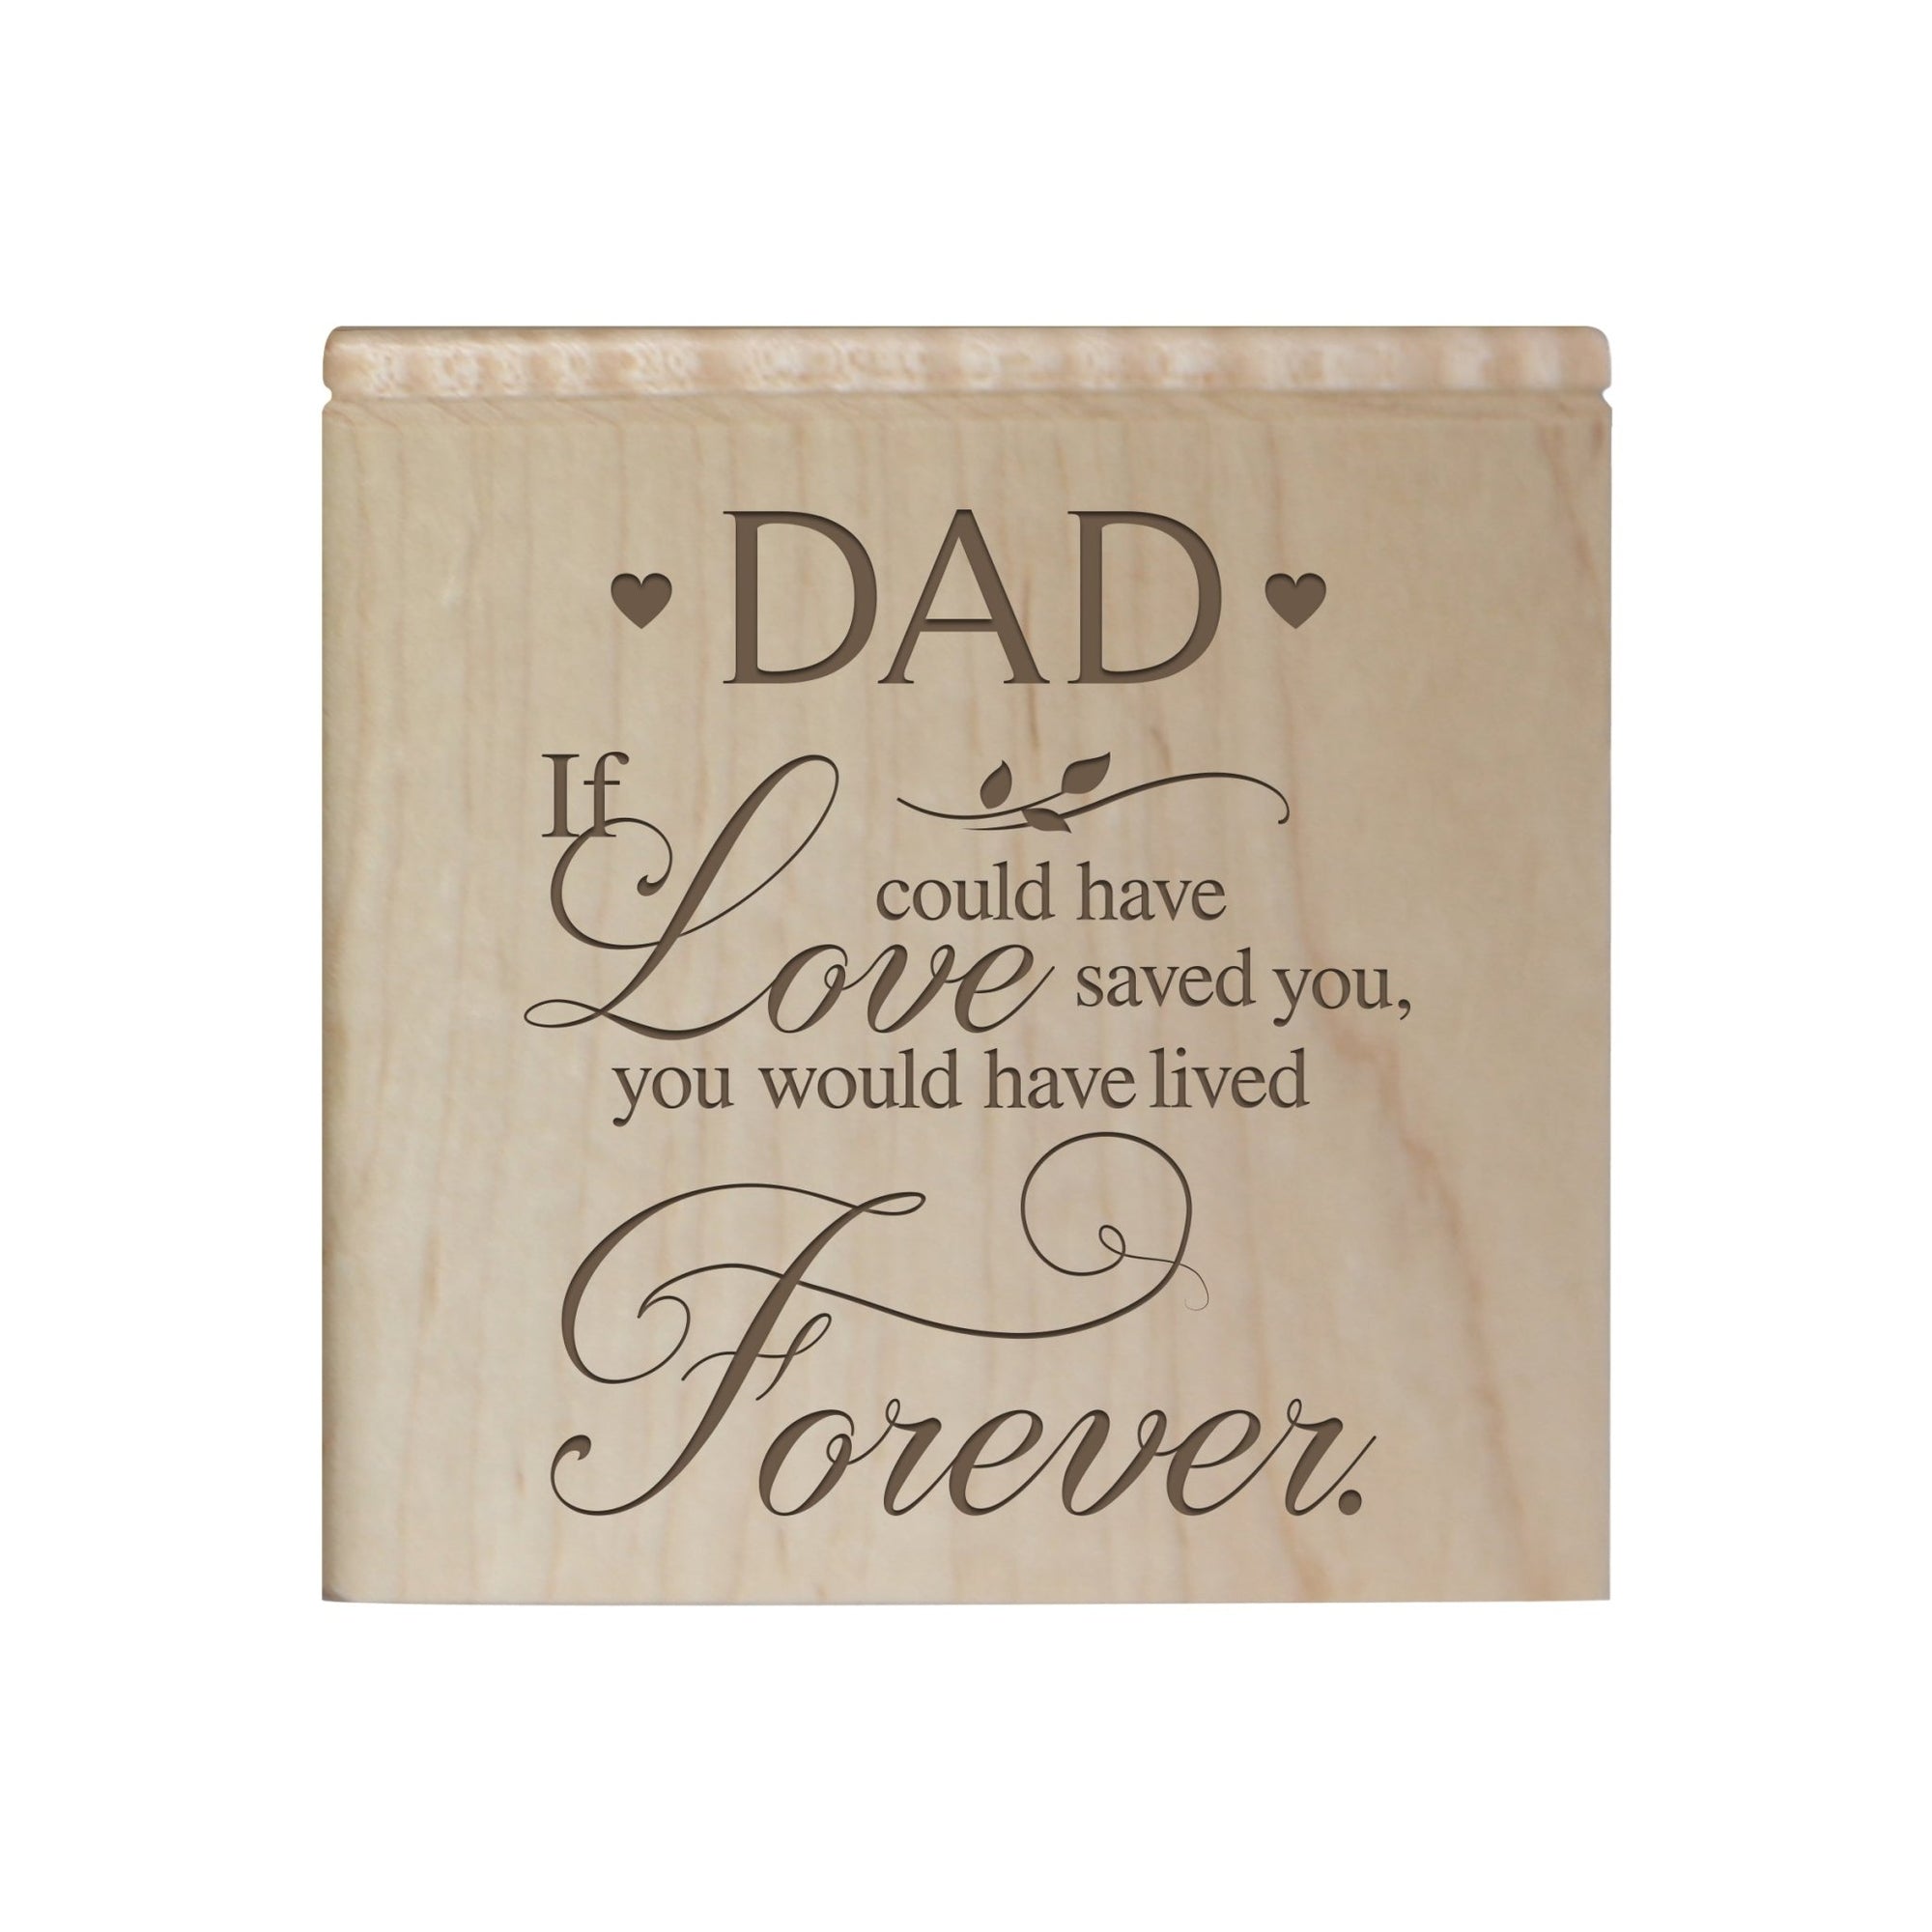 Modern Inspirational Memorial Wooden Cremation Urn Box 4.5x4.5in Holds 49 Cu Inches Of Human Ashes (If love could have saved Dad) Funeral and Commemorative Keepsake - LifeSong Milestones